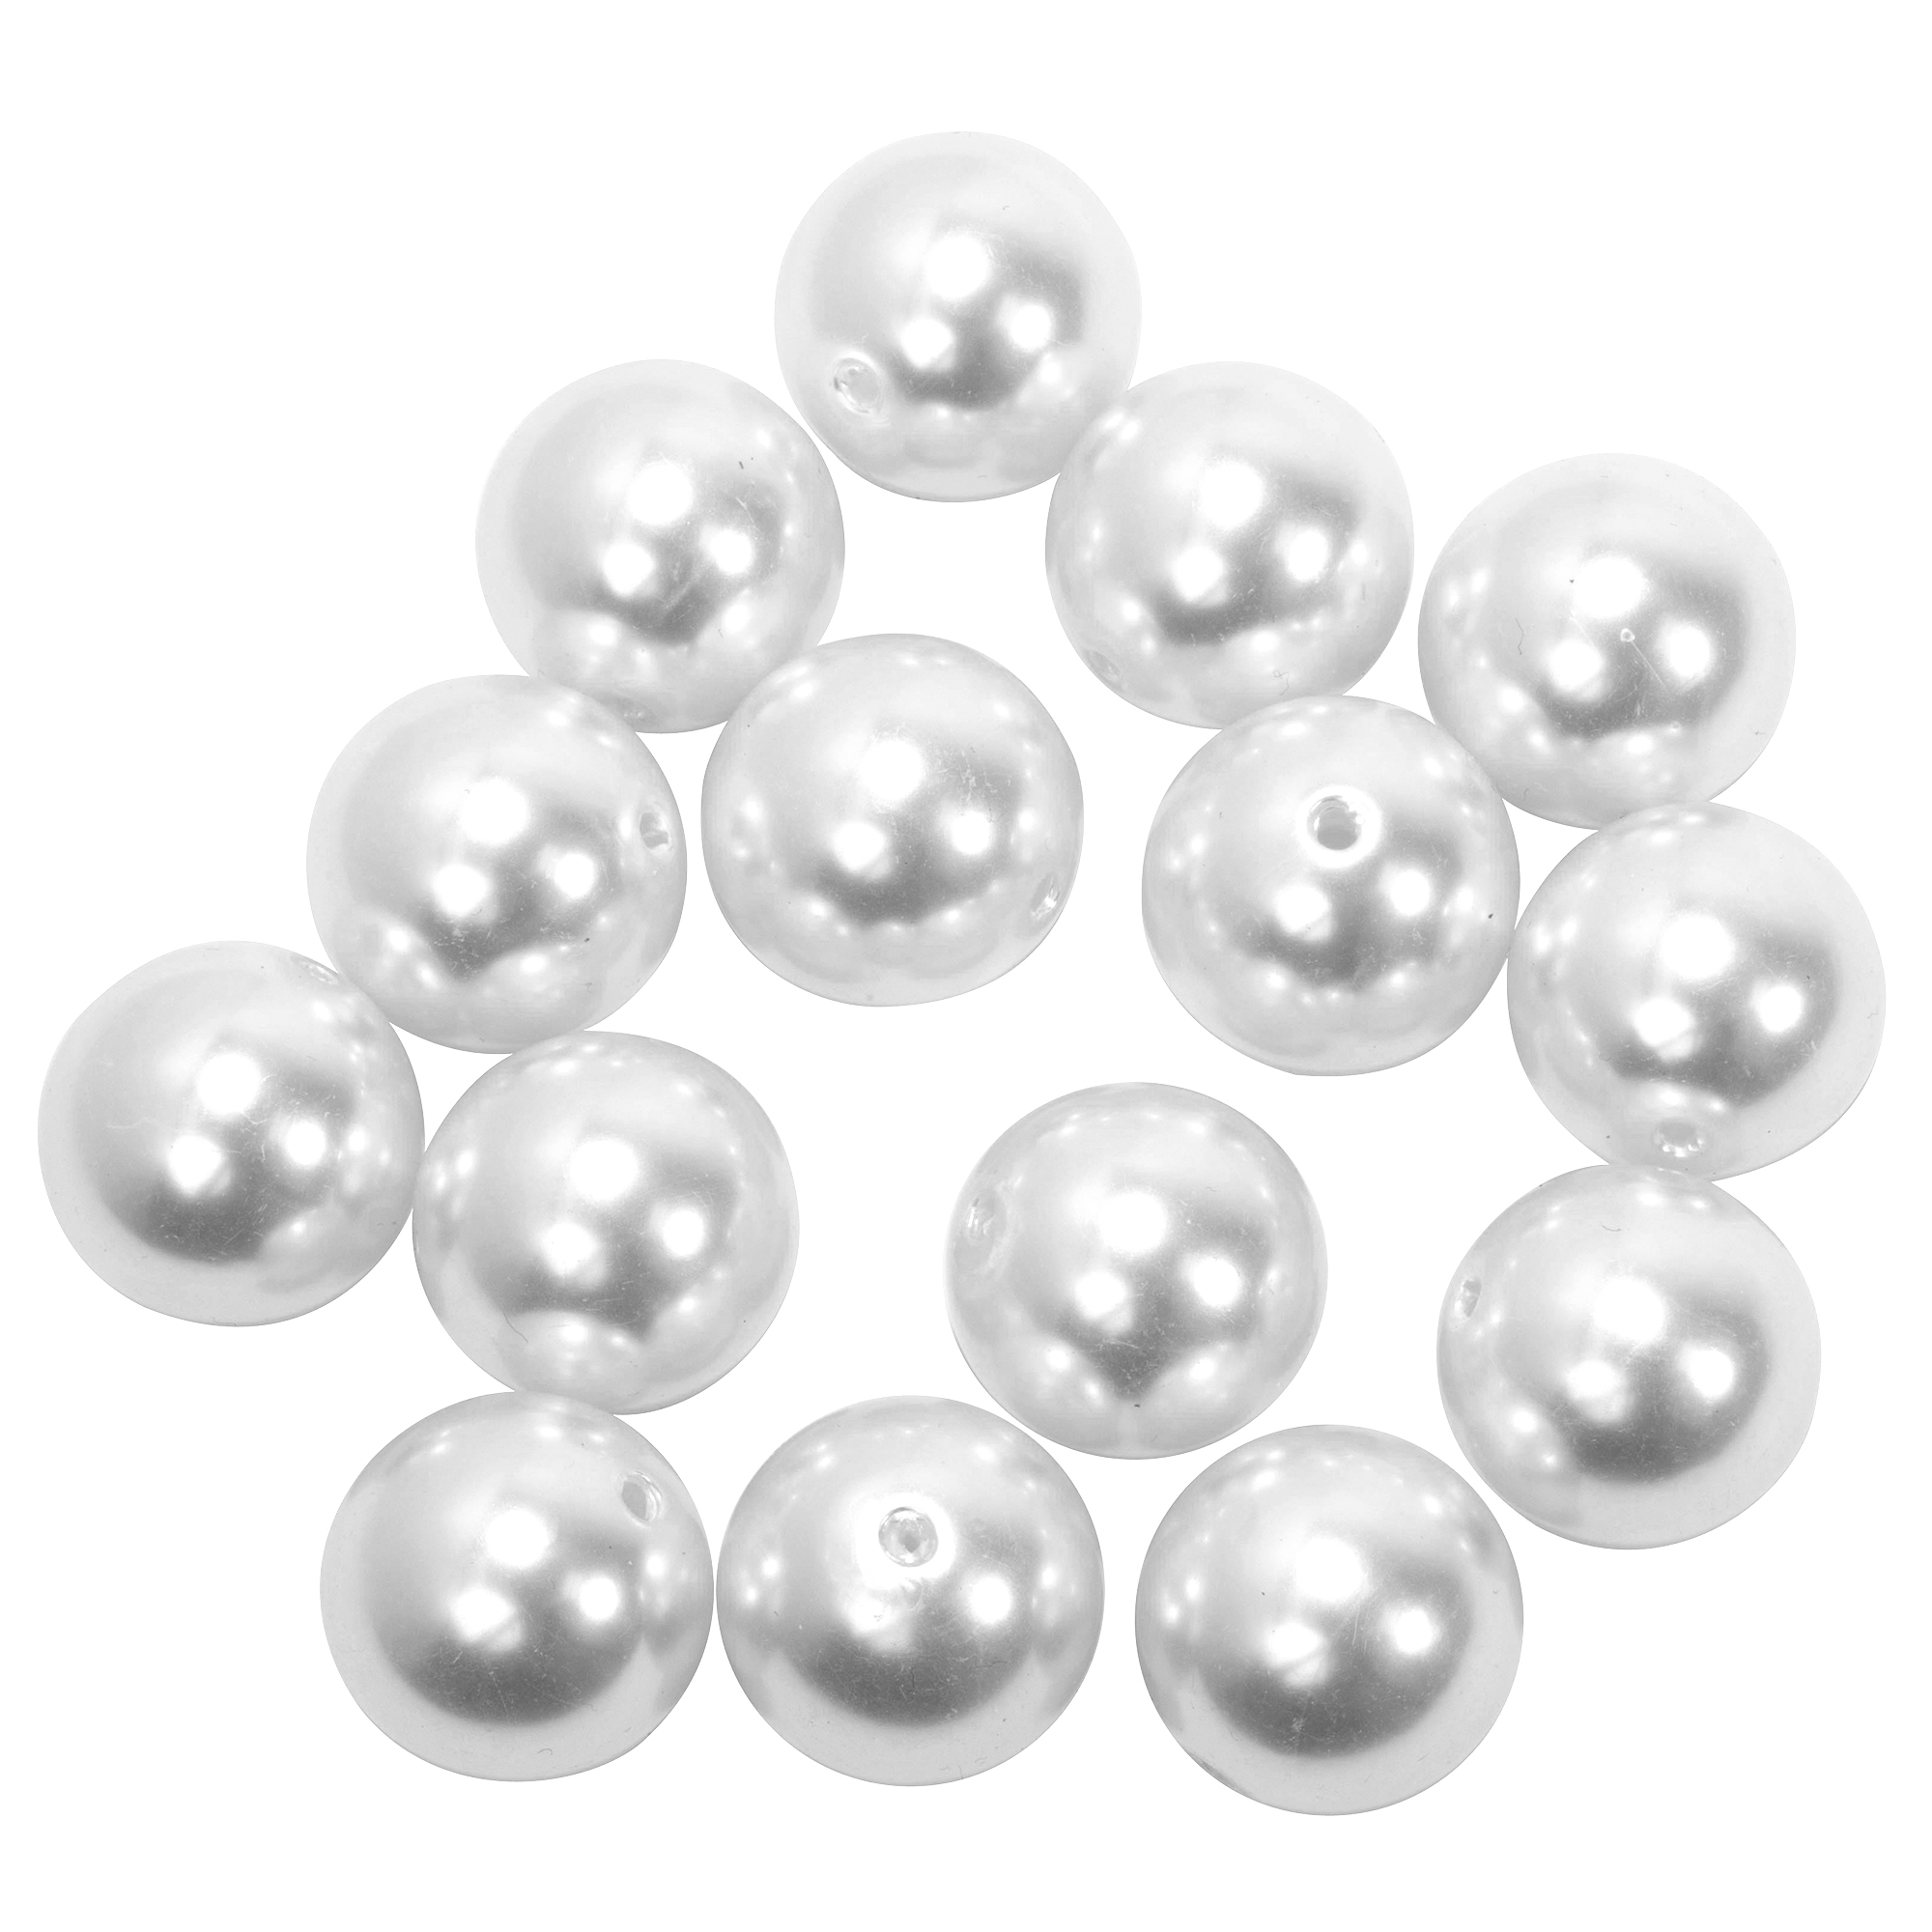 30mm Craft Pearl Beads With Hole 454g/Bag - White